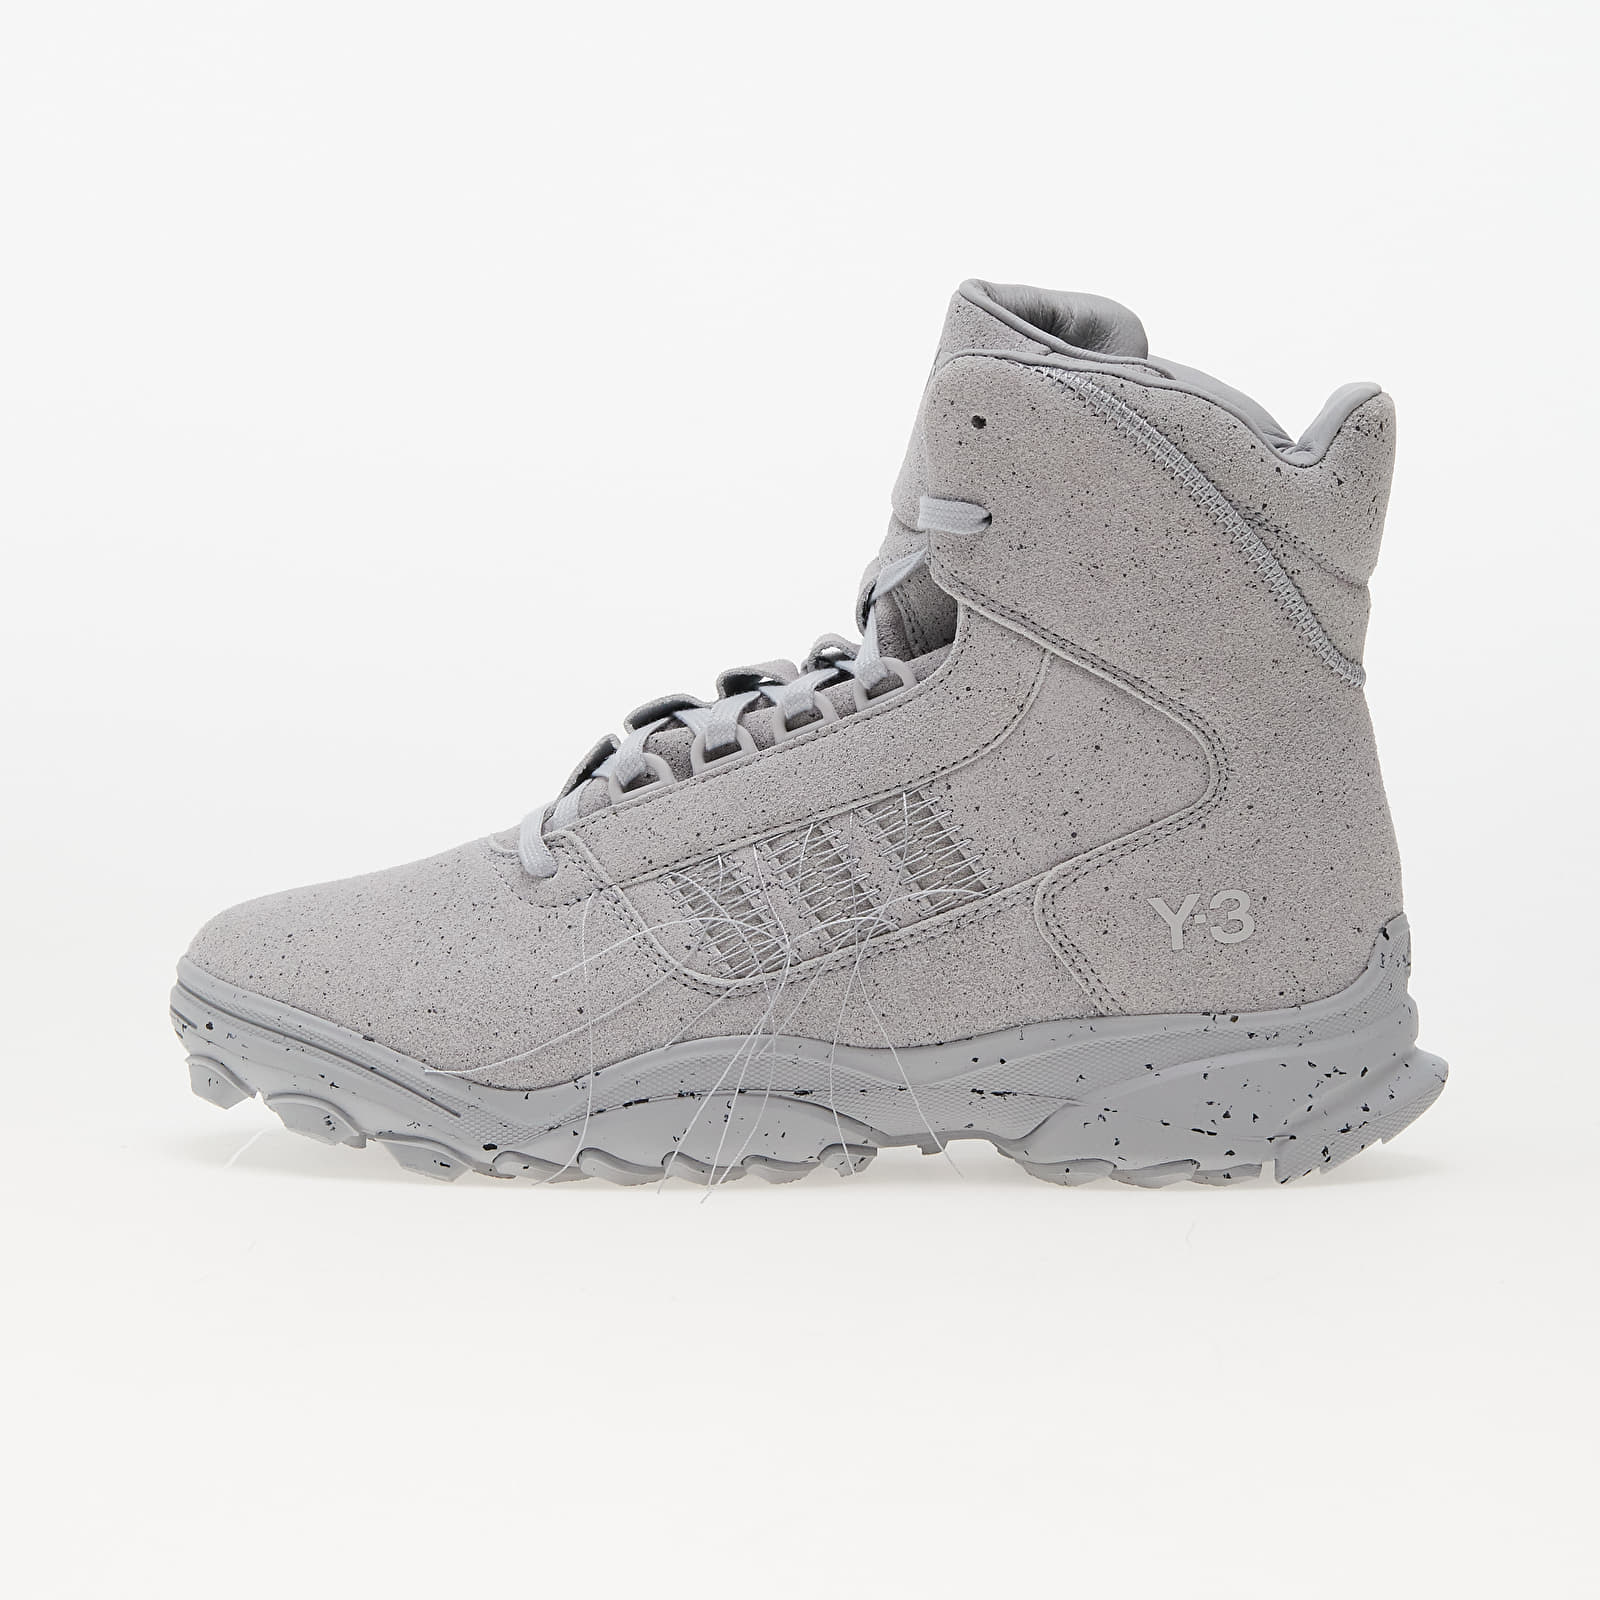 Herenschoenen Y-3 GSG9 Clear Onix/ Clear Onix/ Carbon